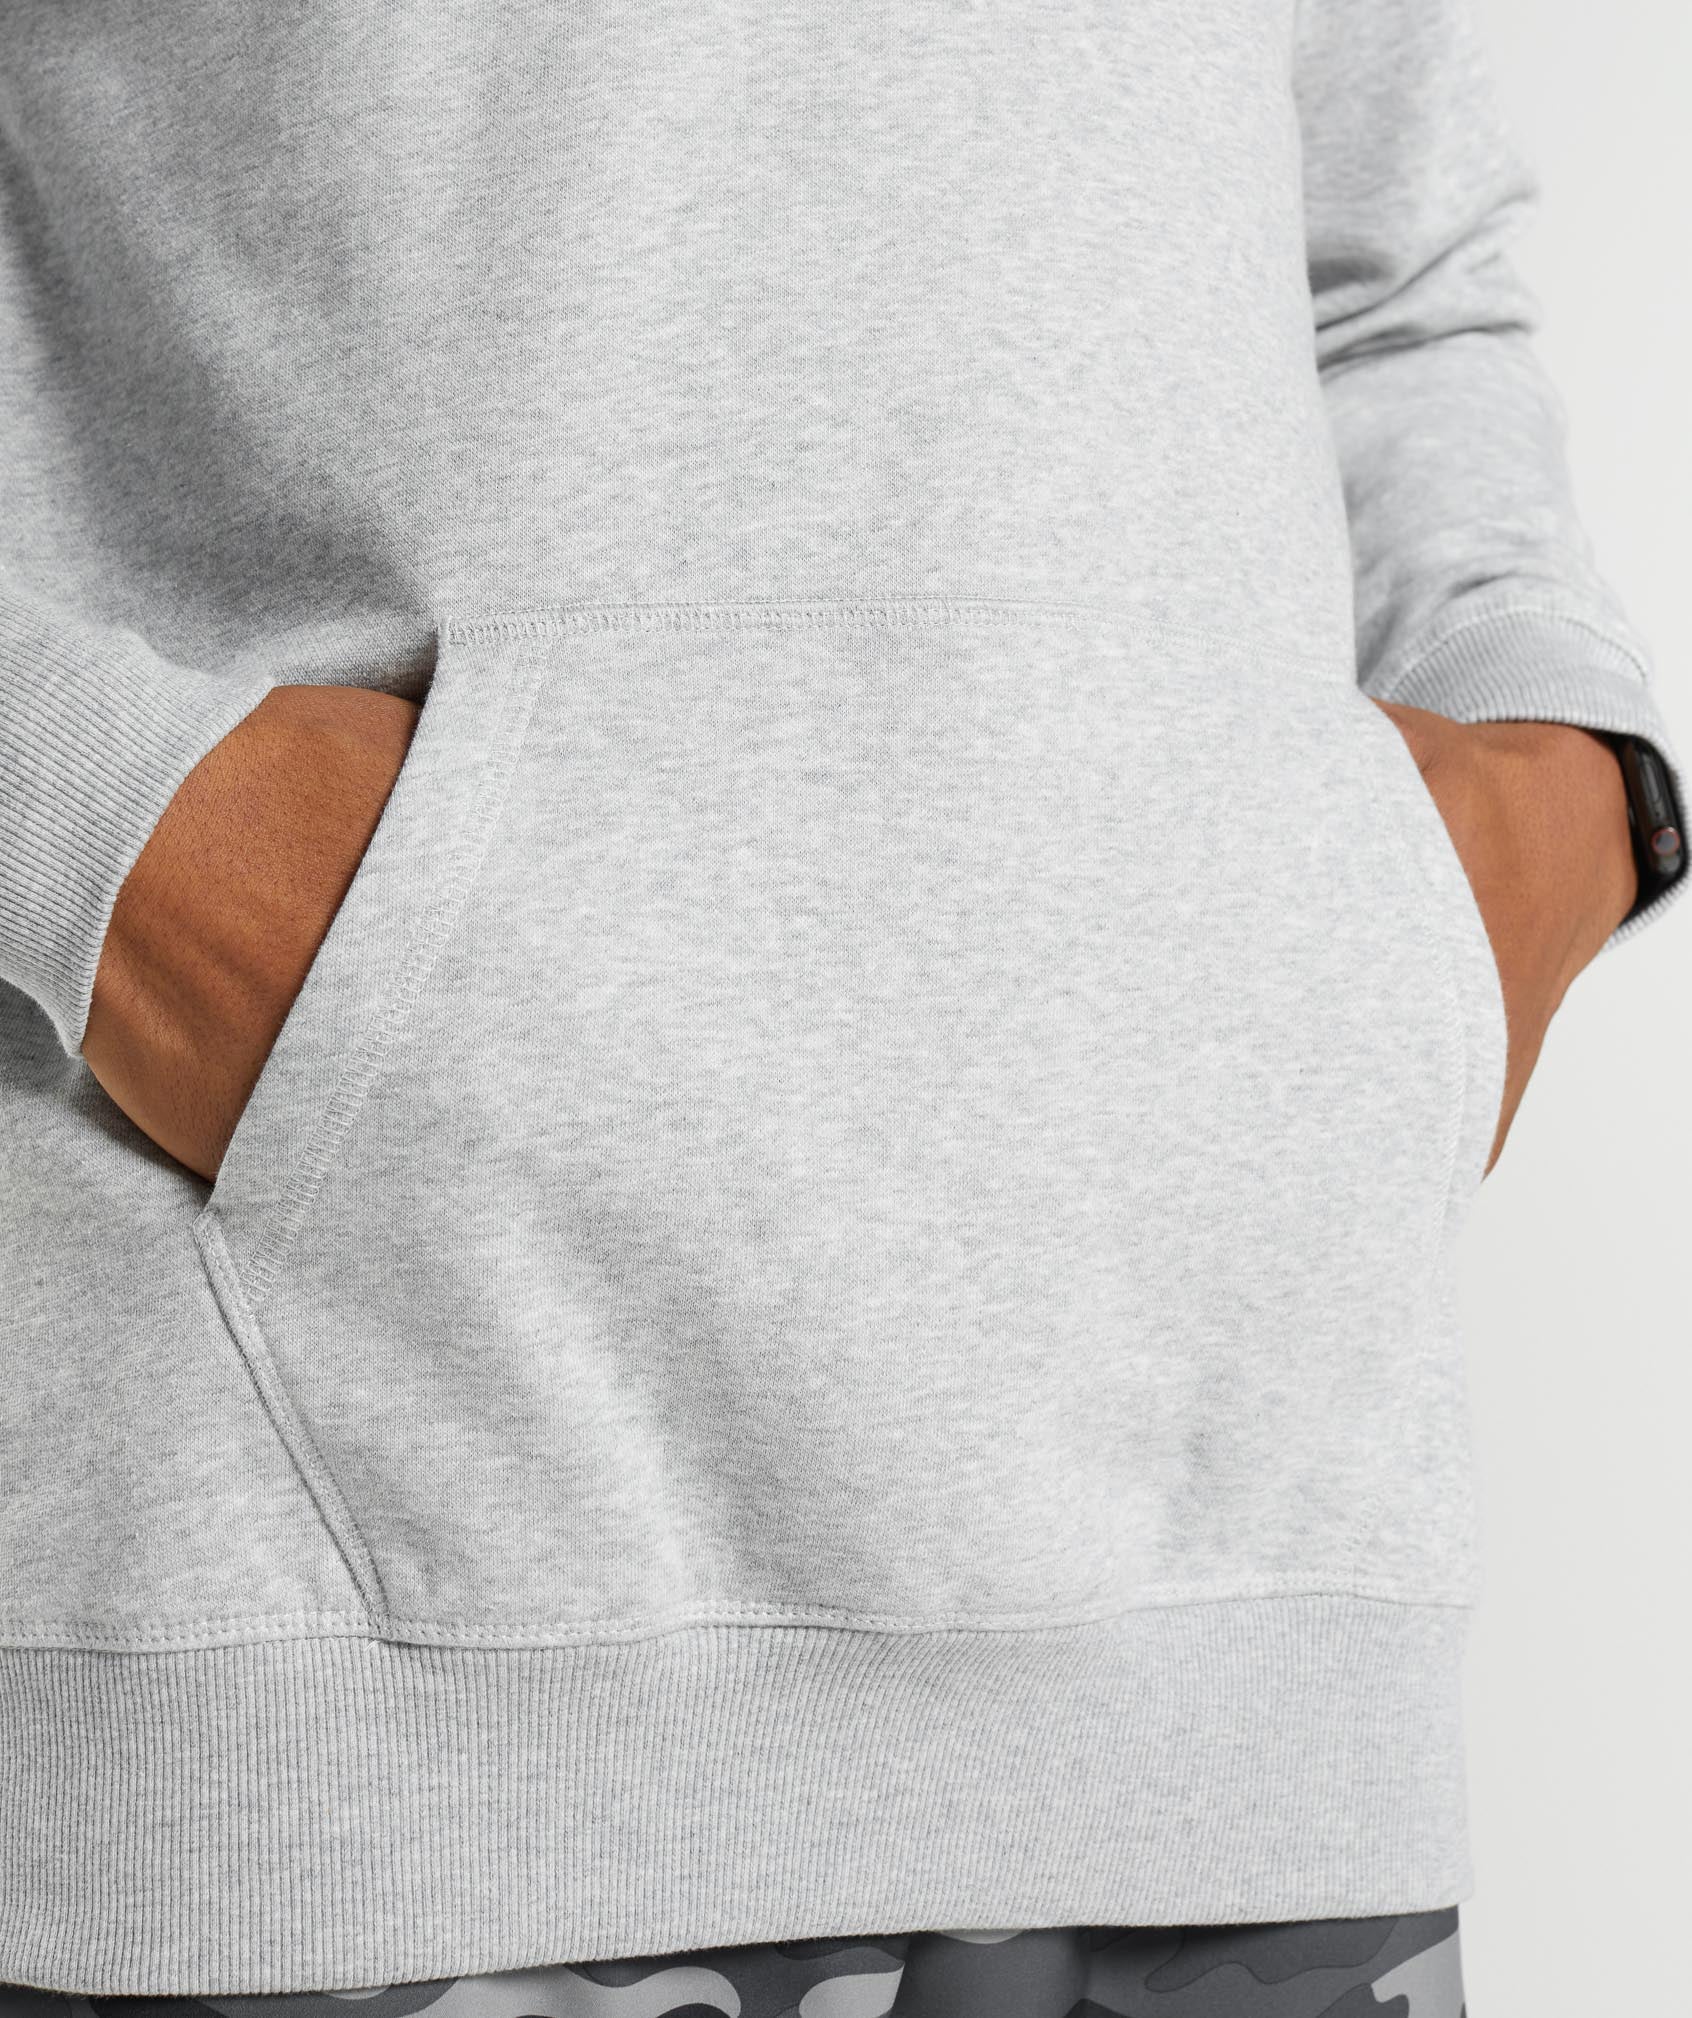 Apollo Hoodie in Light Grey Core Marl - view 6